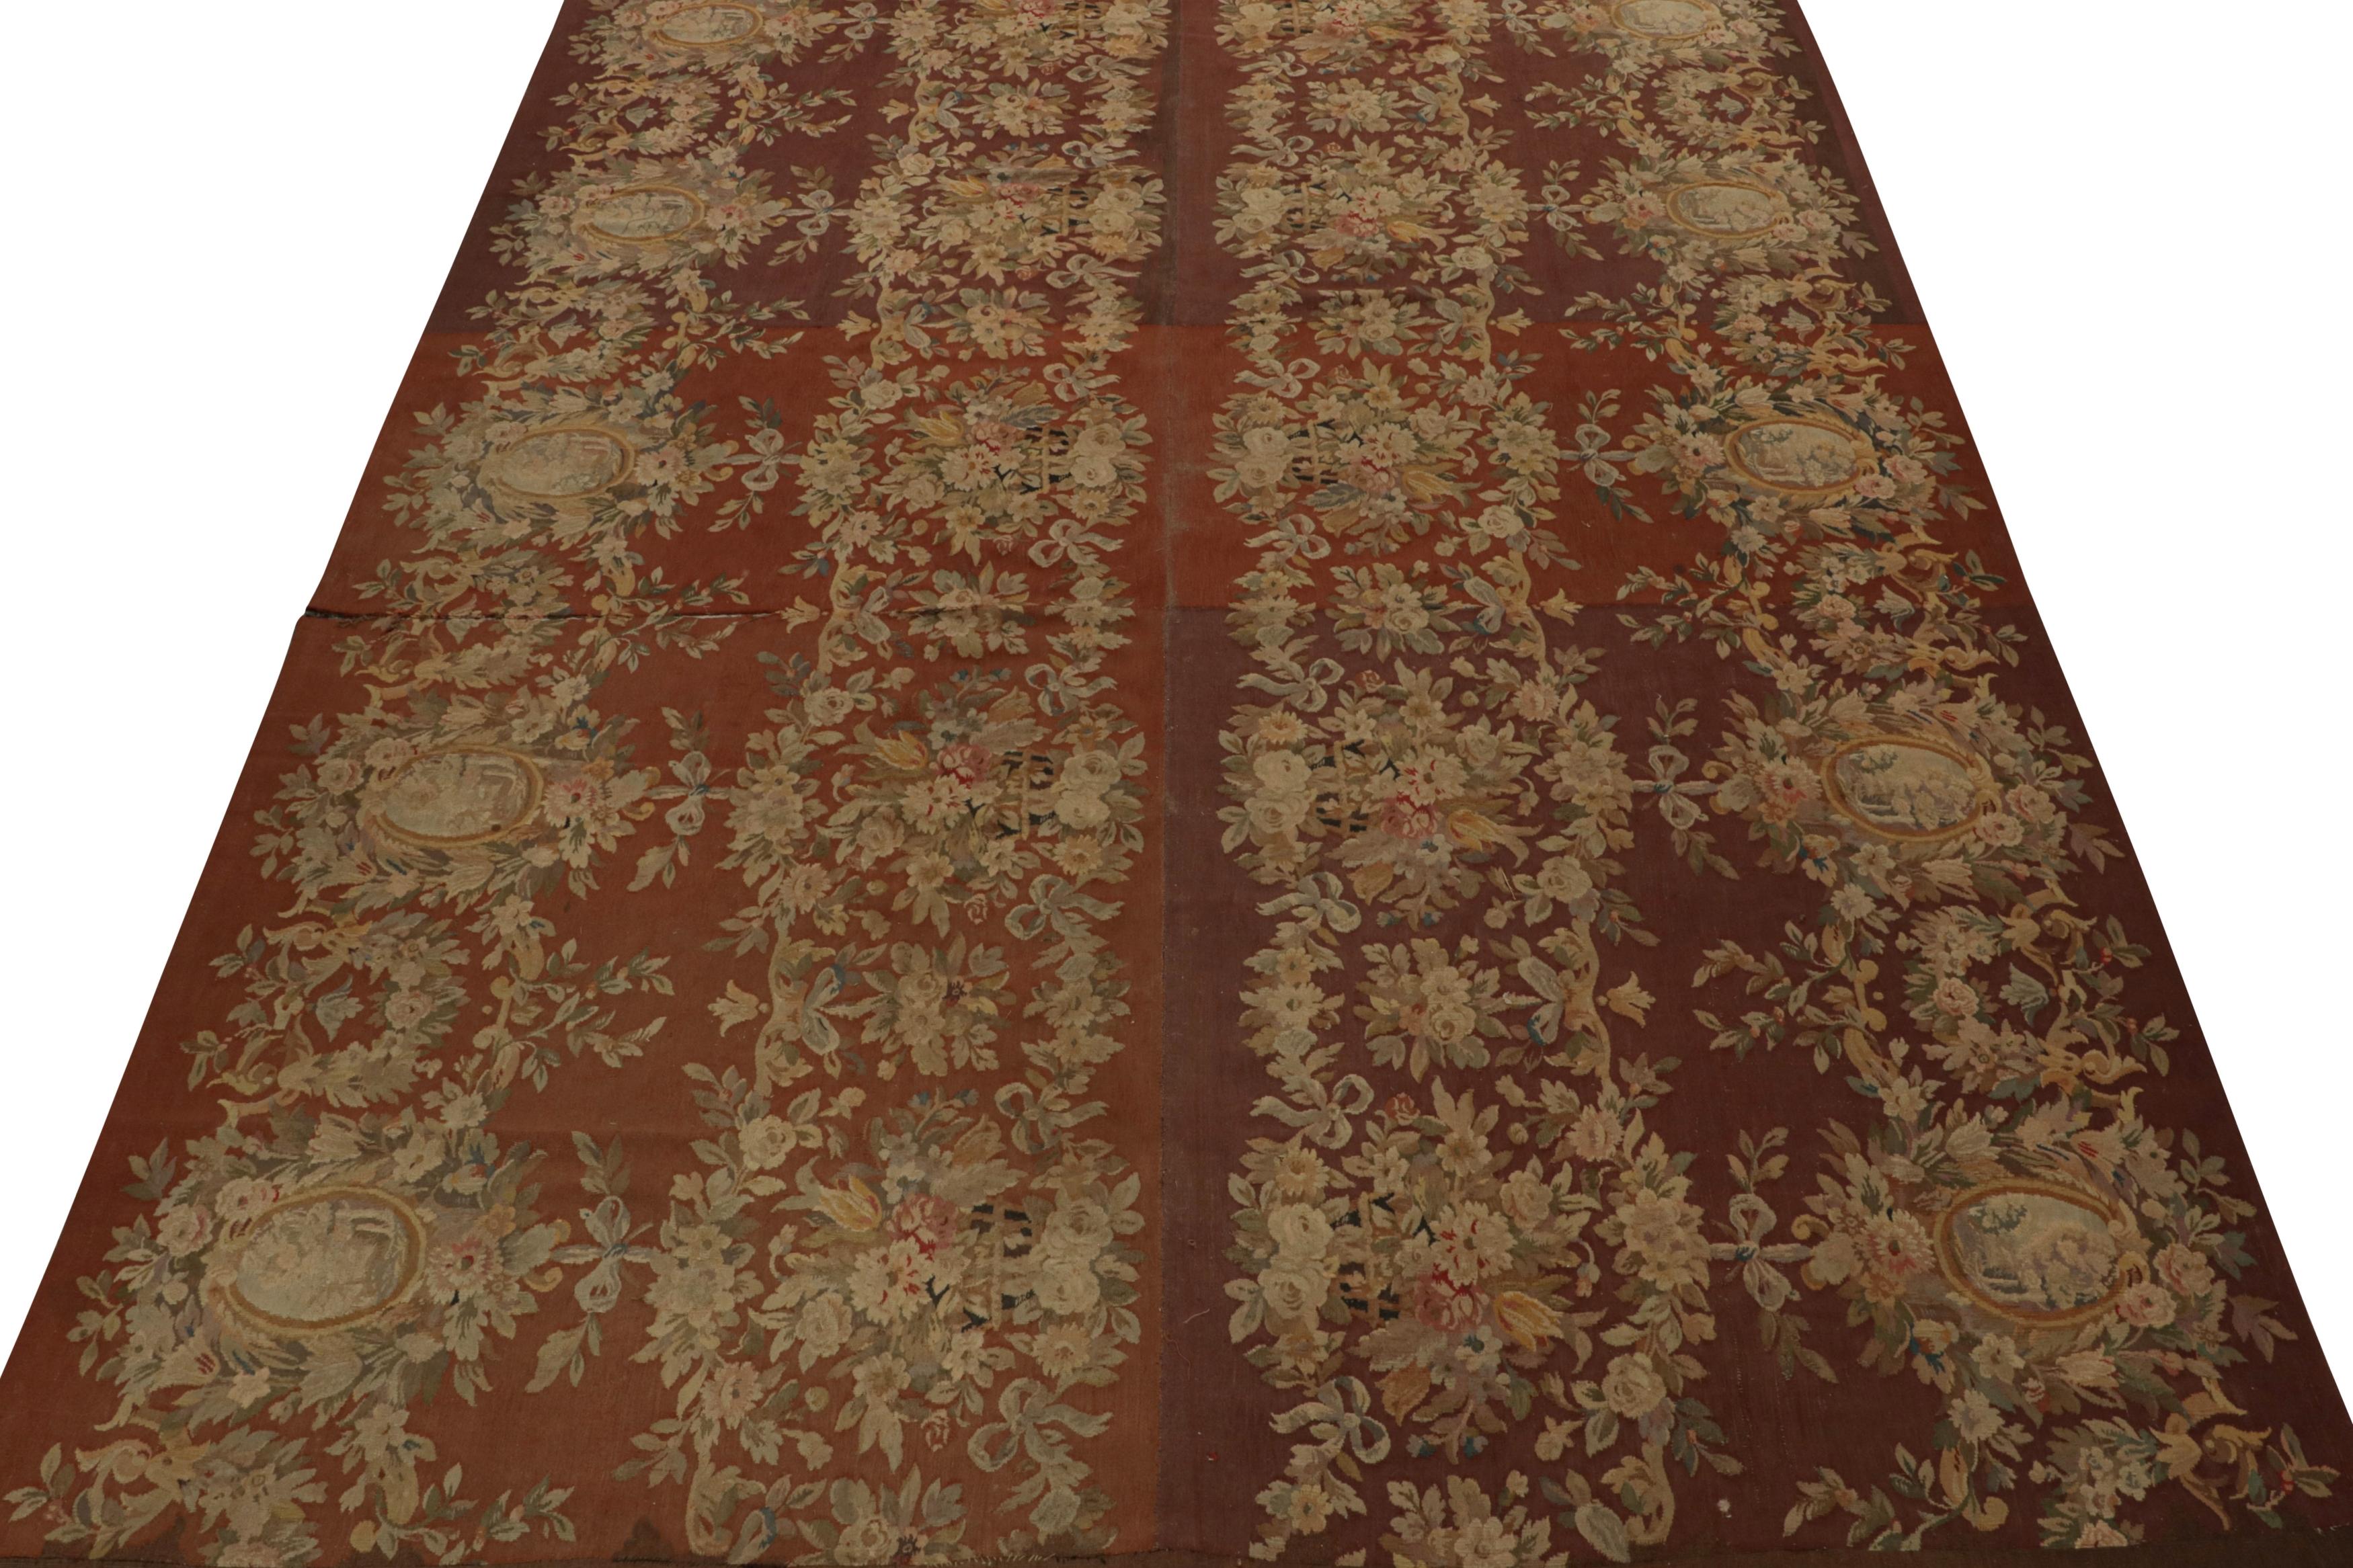 French Vintage Aubusson Flatweave Rug in Brown with Floral Patterns, from Rug & Kilim For Sale